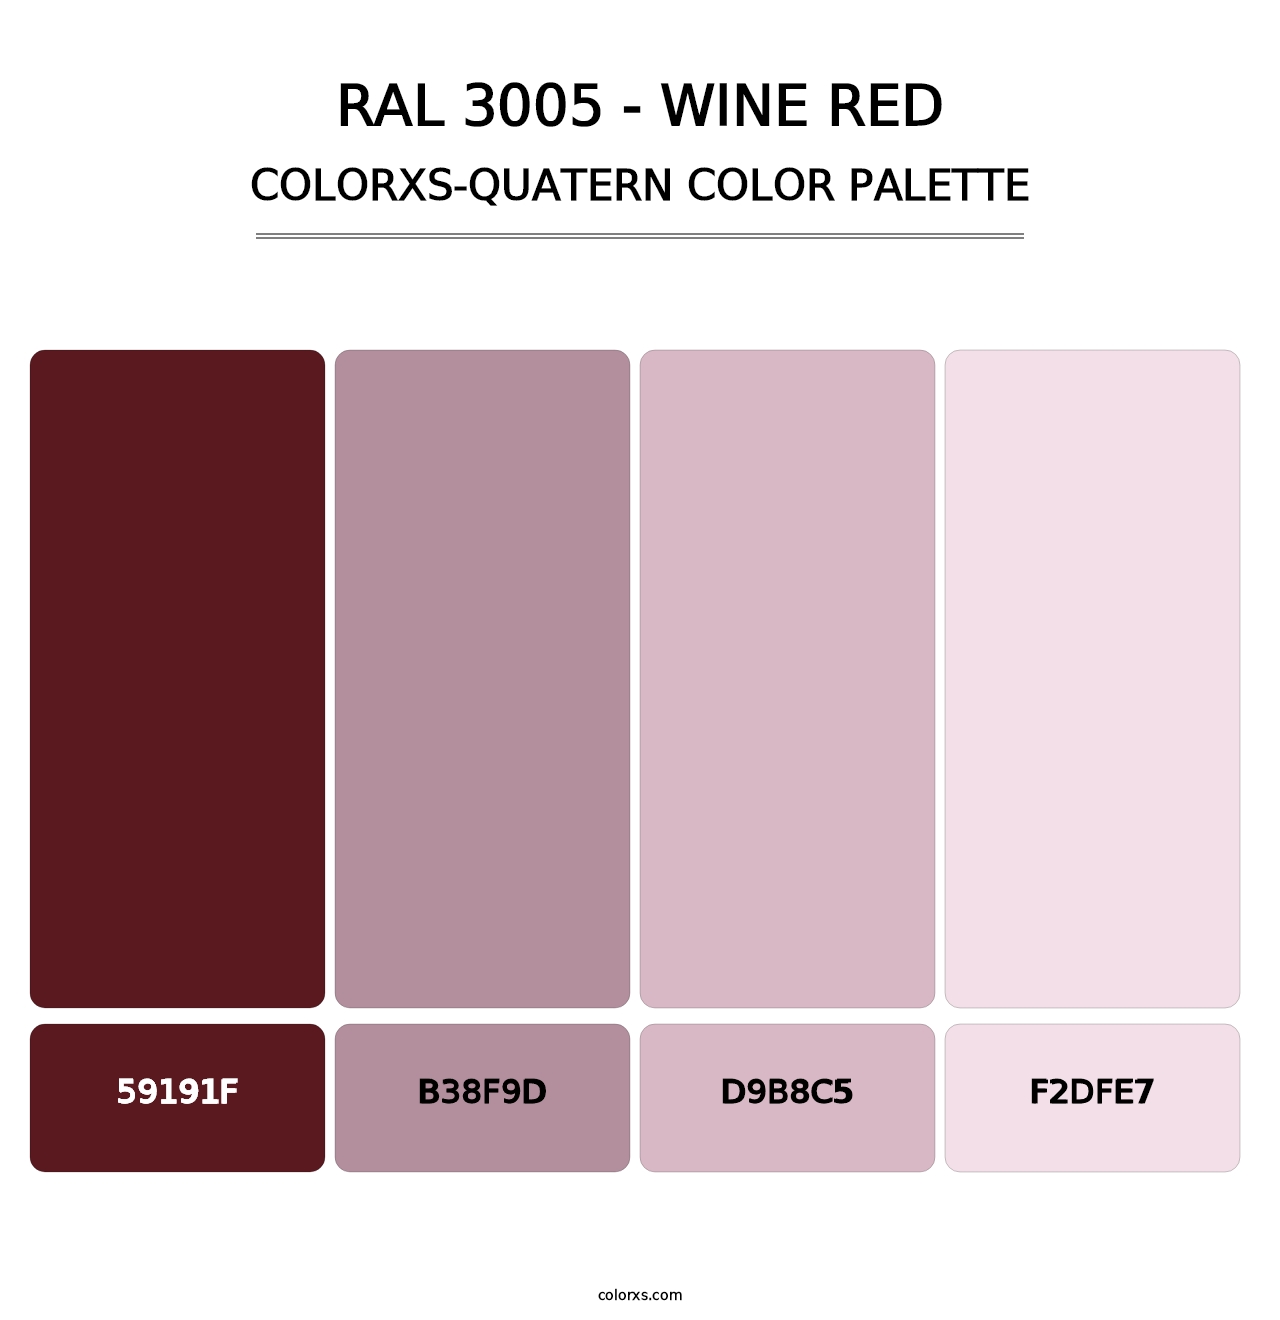 RAL 3005 - Wine Red - Colorxs Quatern Palette